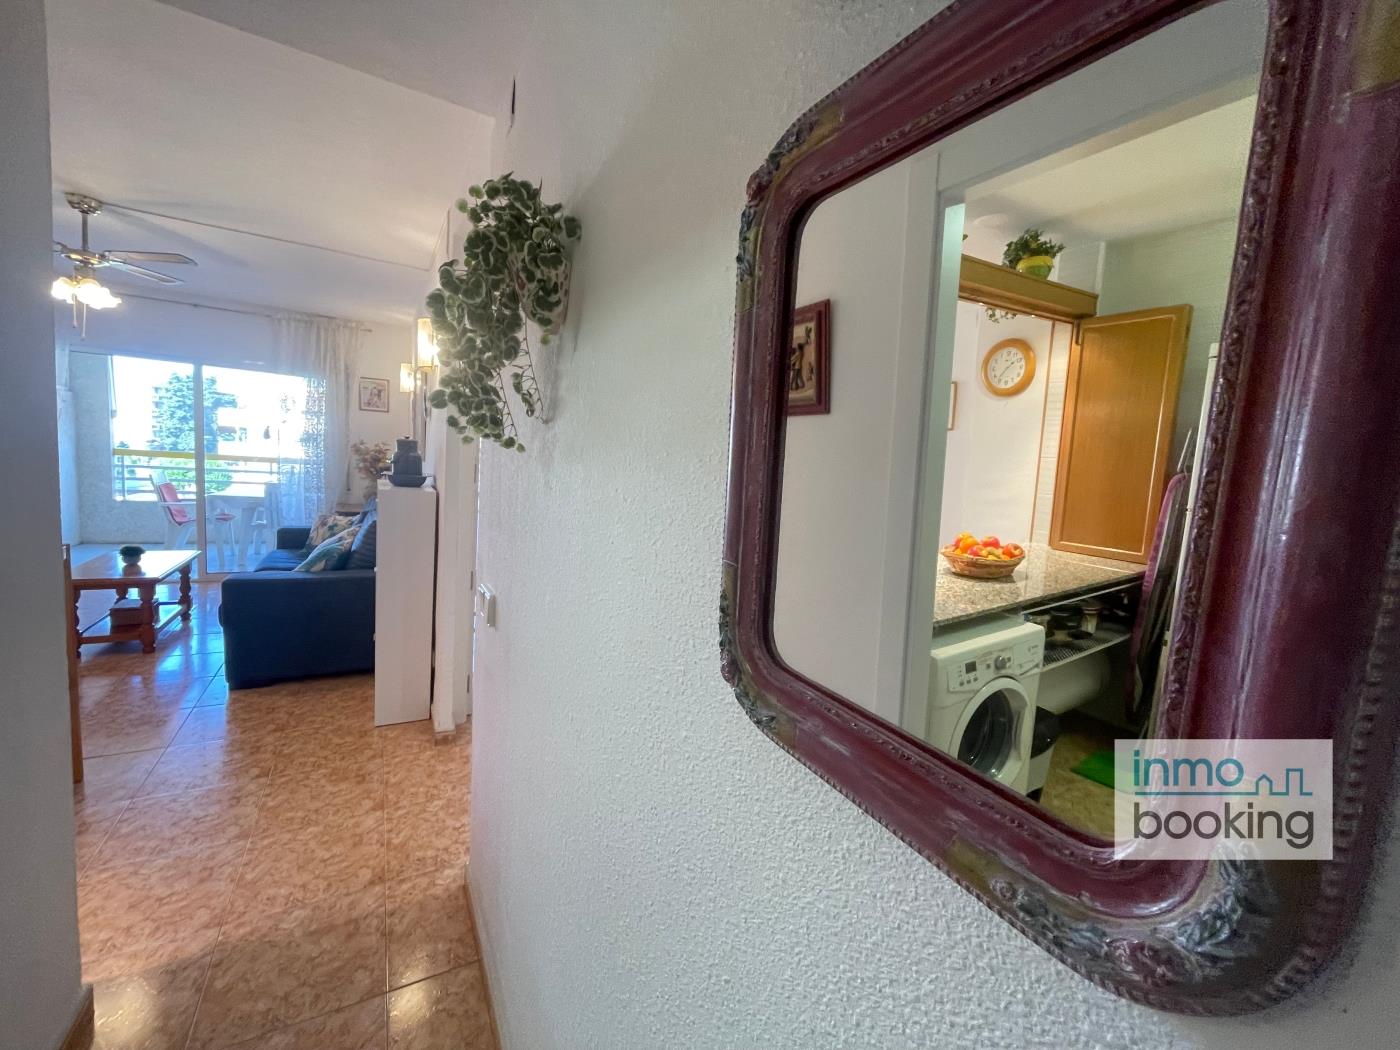 Diamant Apartment, with parking and close to the beach. in salou